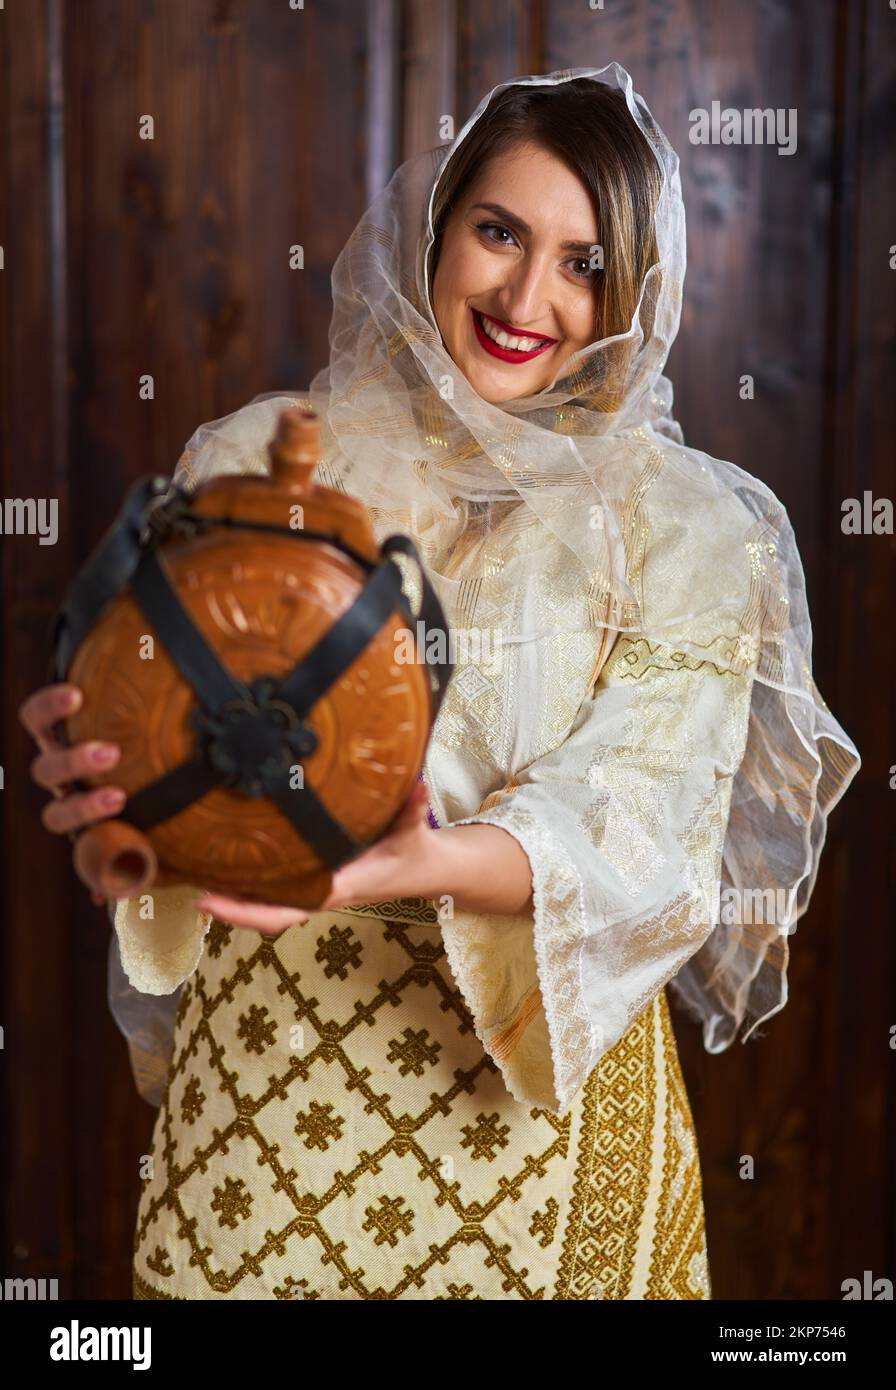 Young Romanian woman in traditional bride popular costume in a vintage home holding a wooden wine bottle Stock Photo